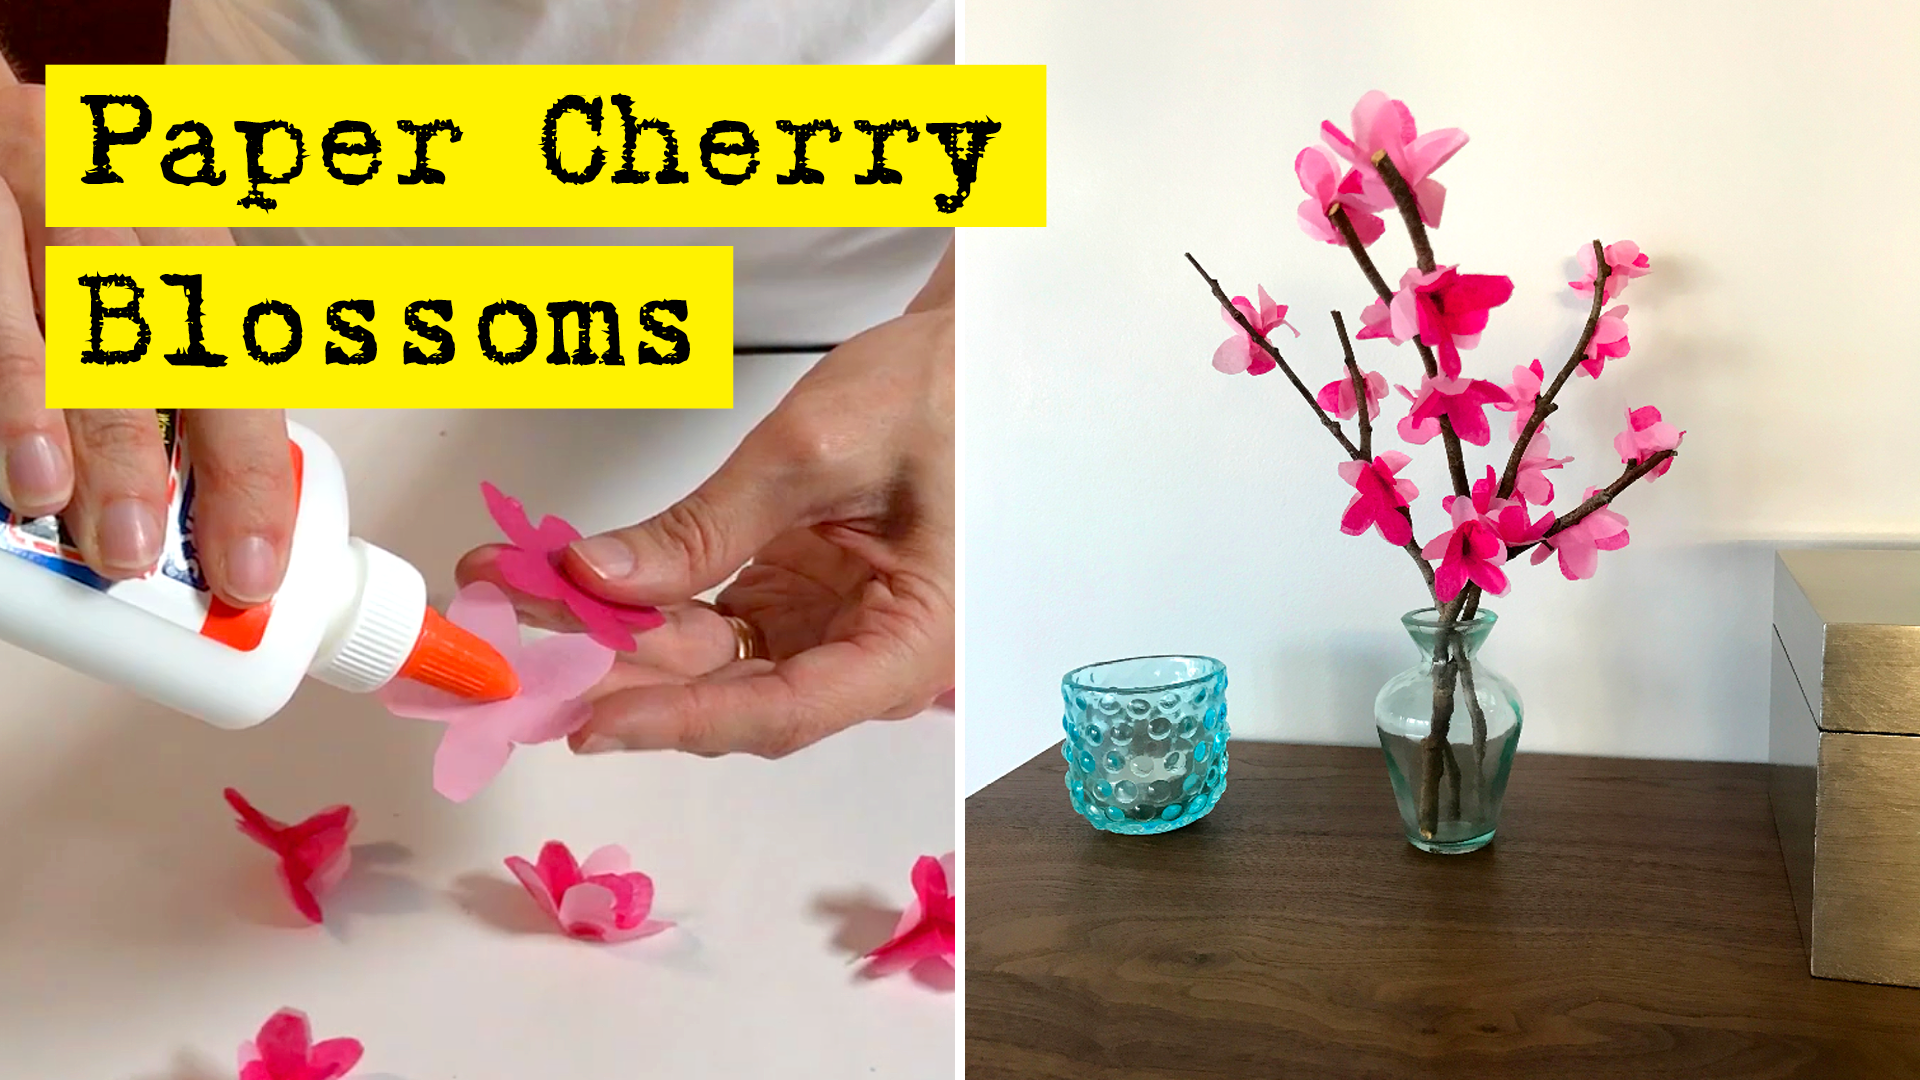 How To Make Paper Cherry Blossoms by DIY Presto!